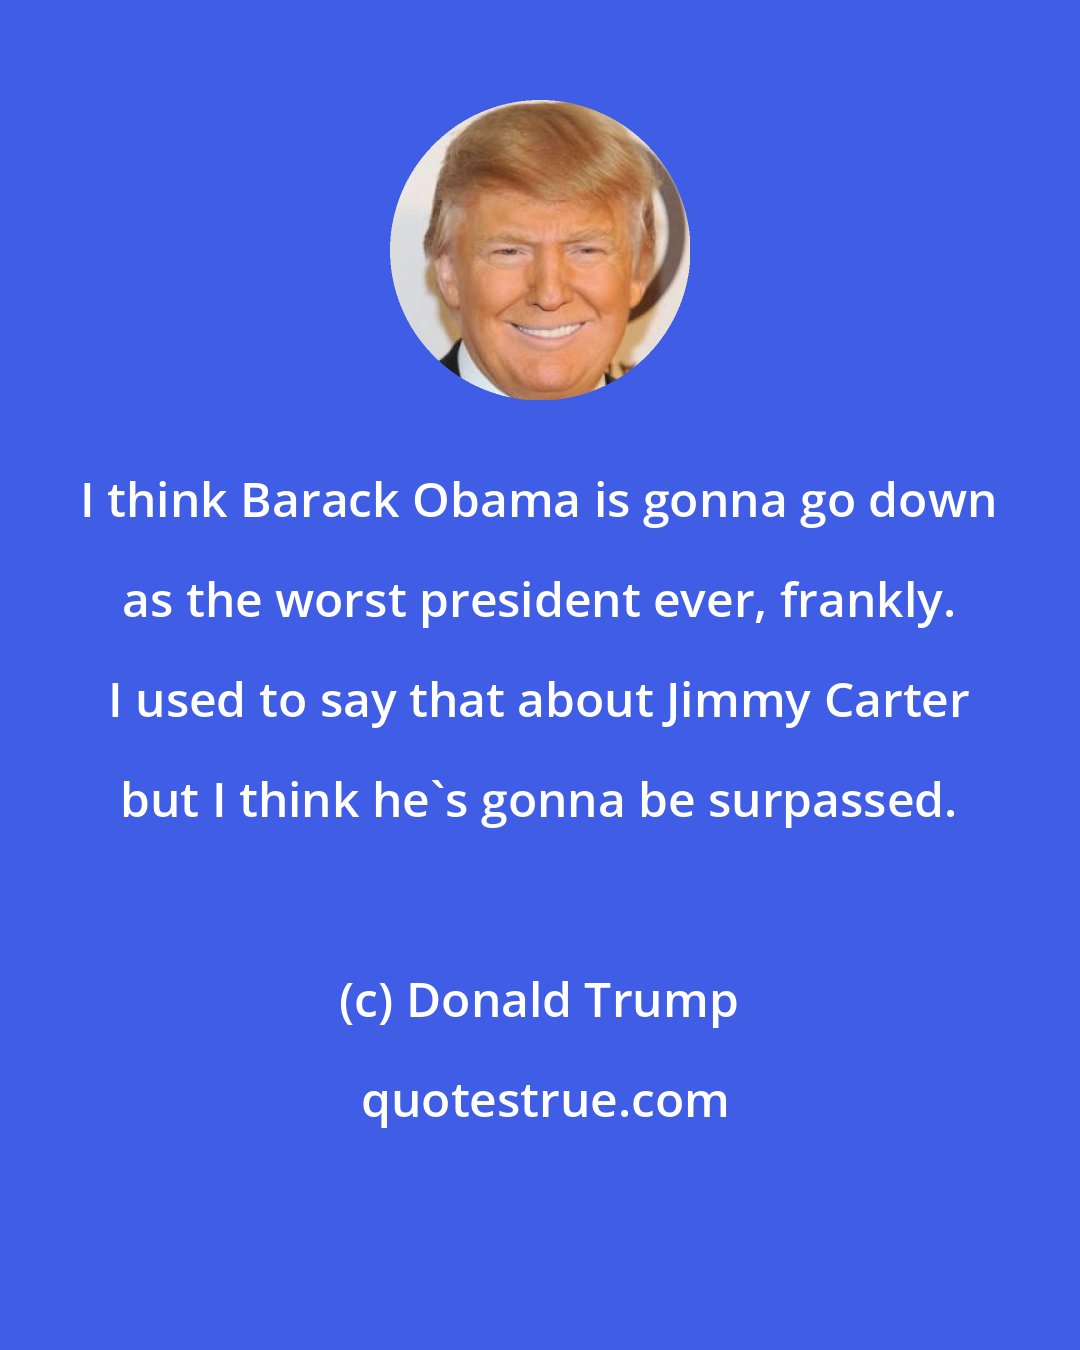 Donald Trump: I think Barack Obama is gonna go down as the worst president ever, frankly. I used to say that about Jimmy Carter but I think he's gonna be surpassed.